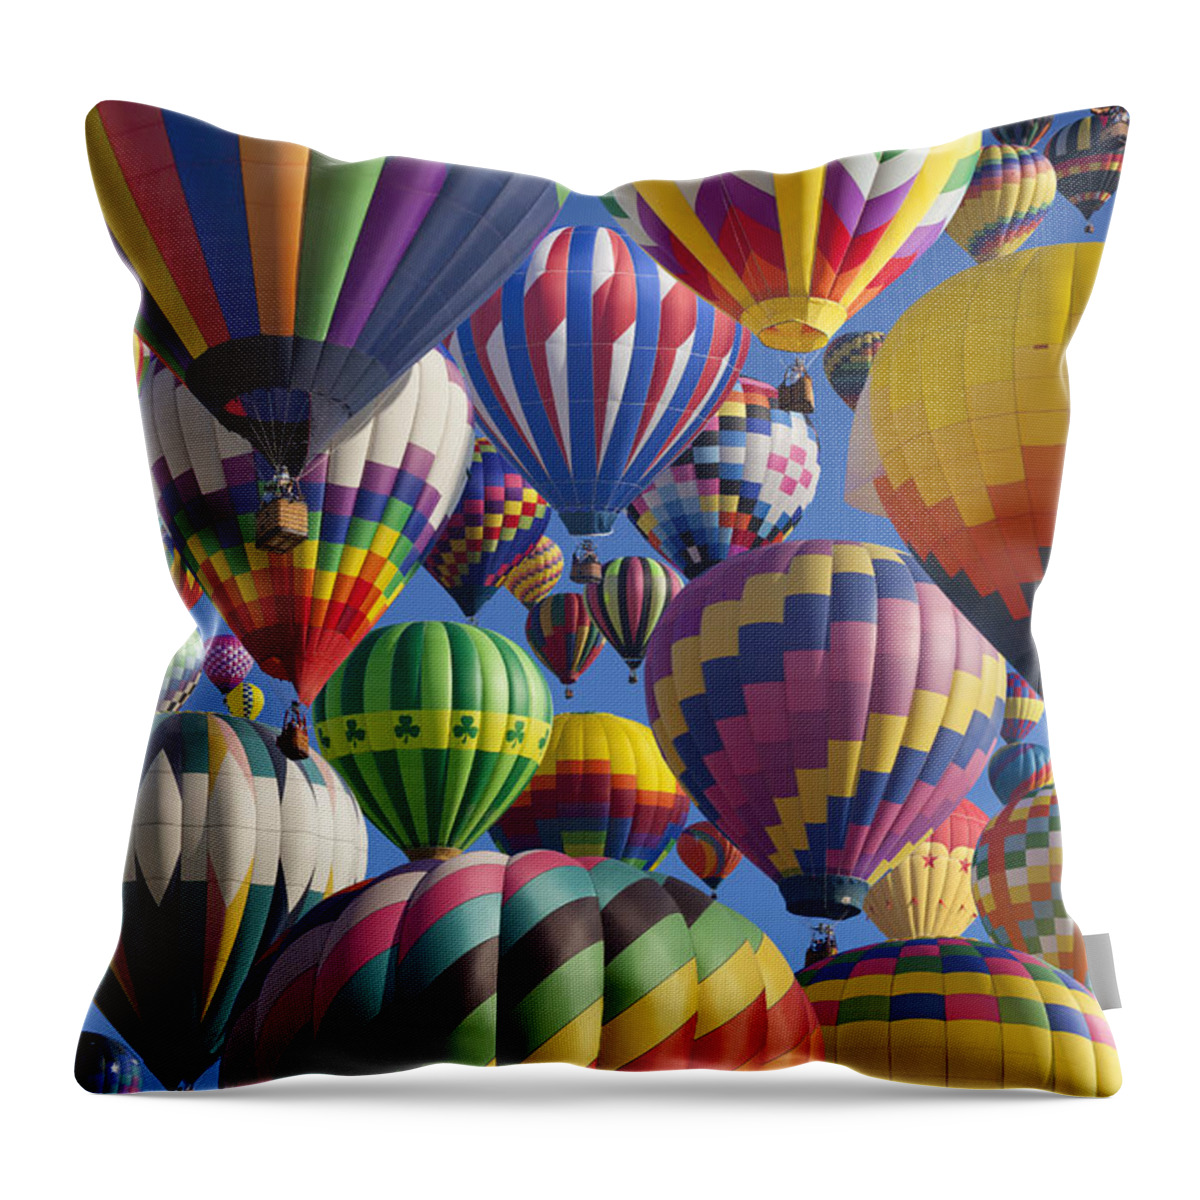 Hot Air Balloon Throw Pillow featuring the photograph Hot Air Ballooning 3 by Anthony Totah